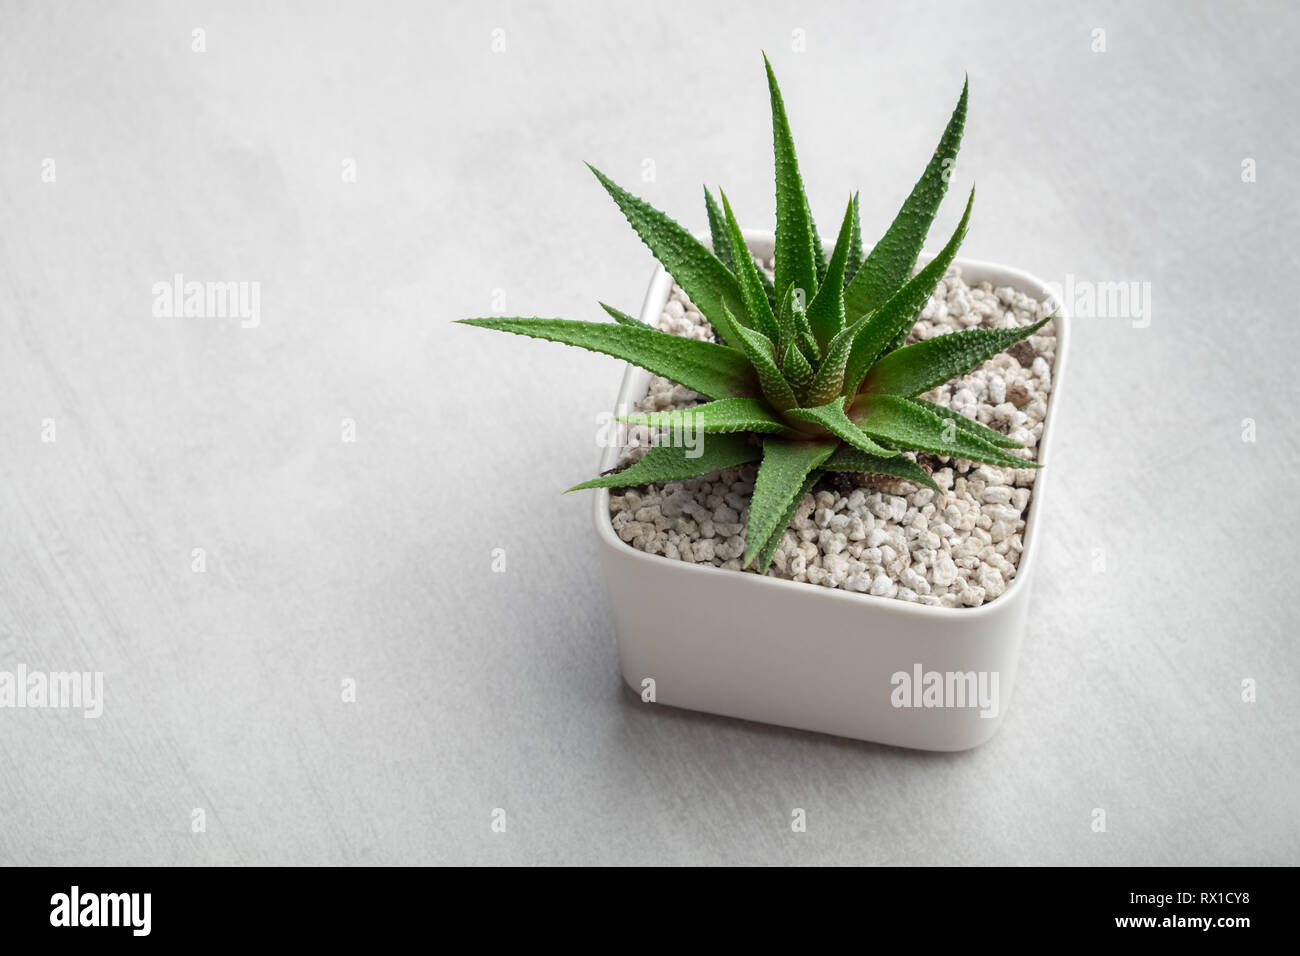 Haworthia succulent in pot on white desk. Copy space for text. Stock Photo